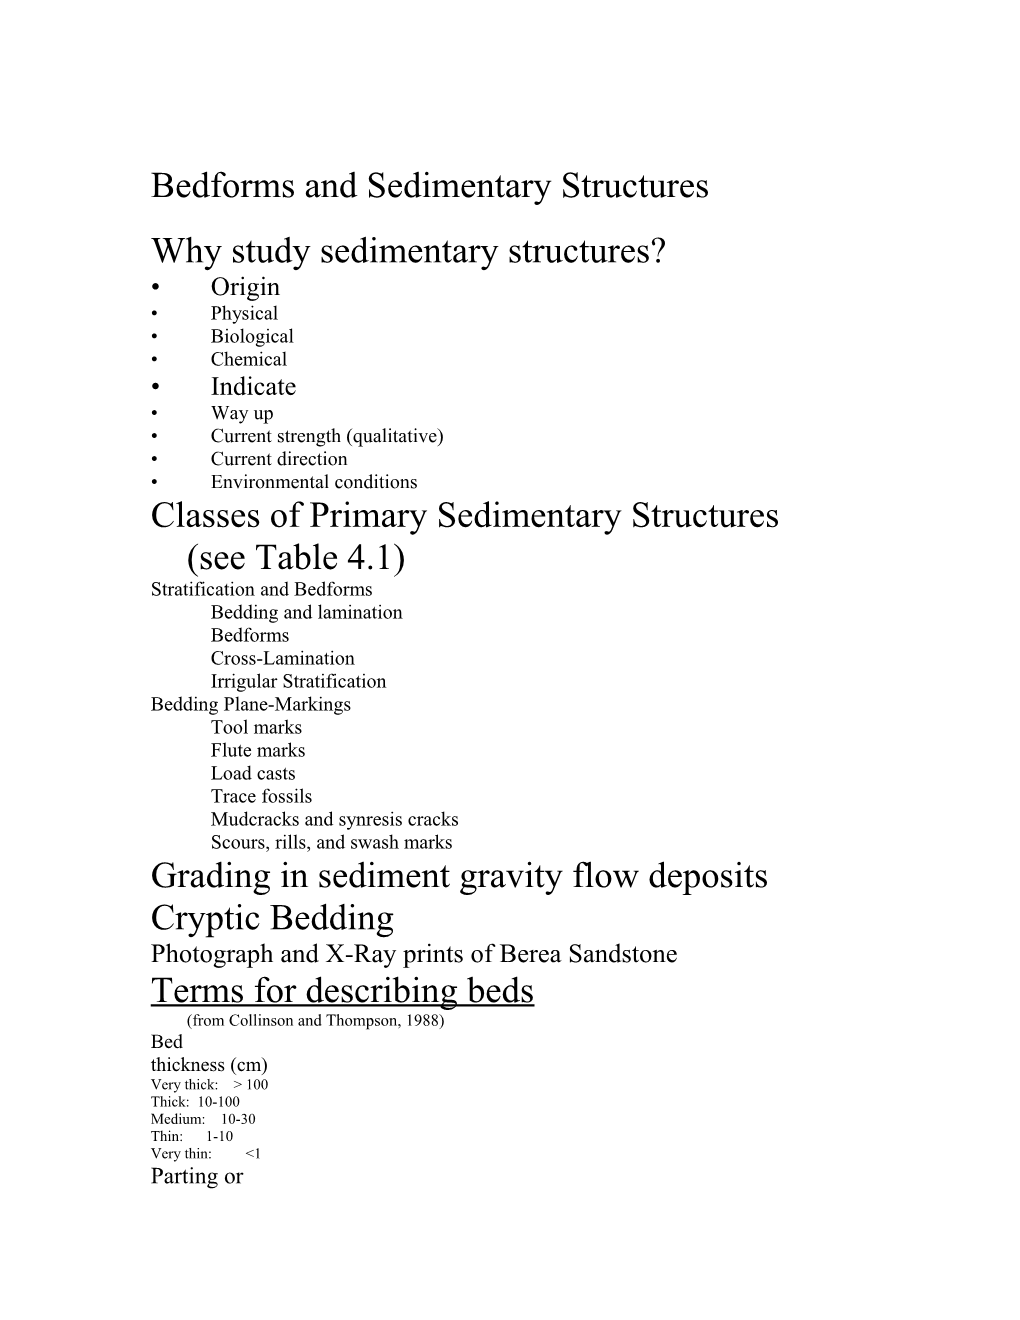 Bedforms and Sedimentary Structures